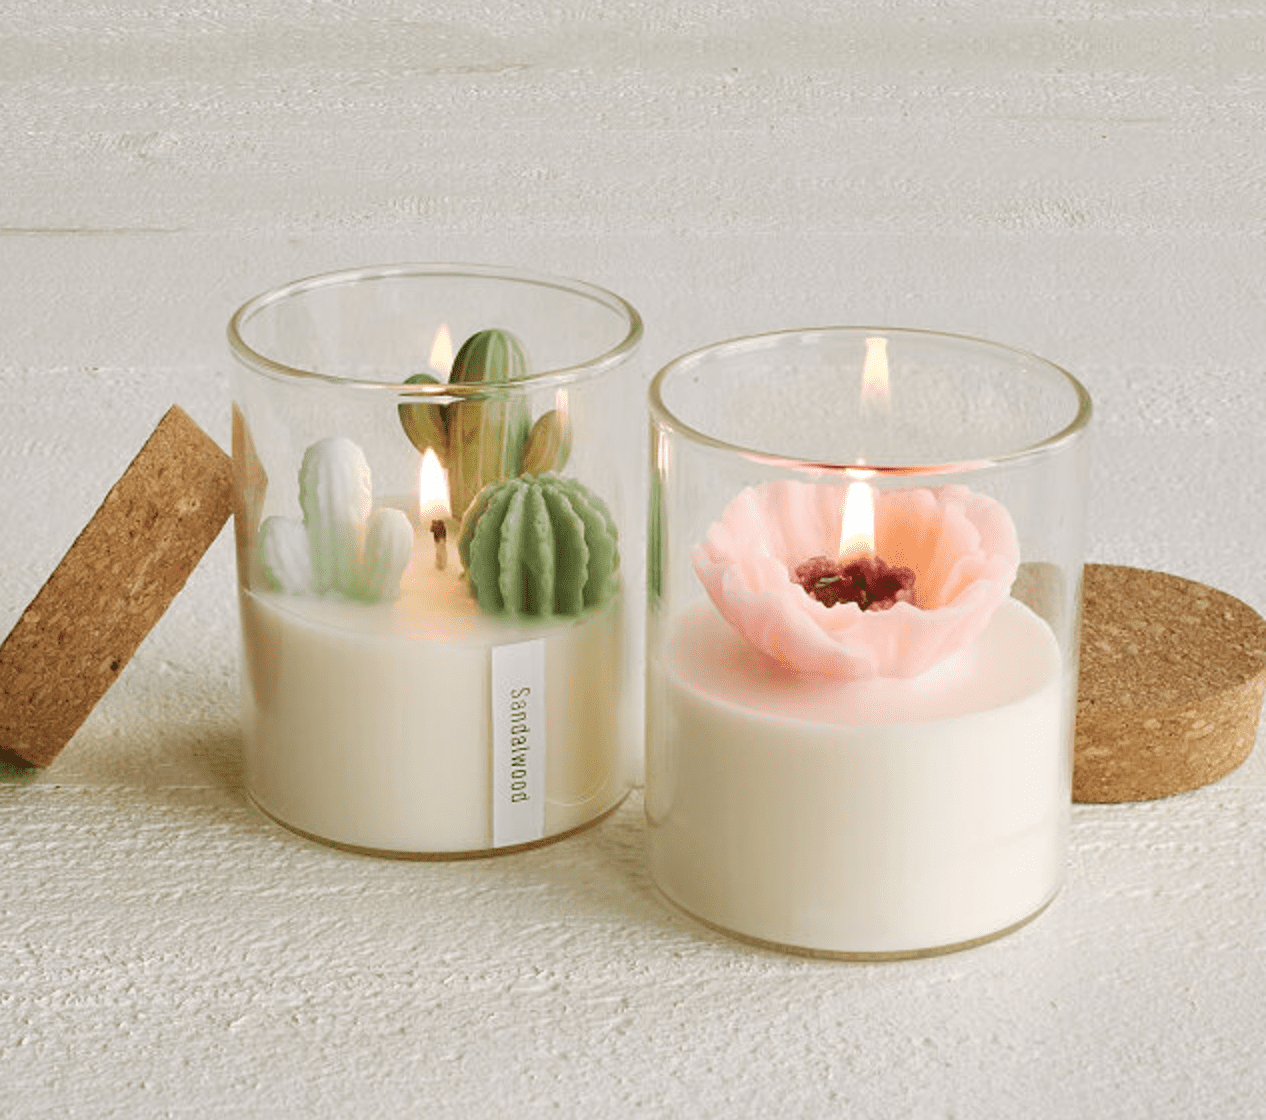 unique candle unique gift candle gift vegan Scented candle painted candle soy candle soy wax candle vegan candles gifts for her